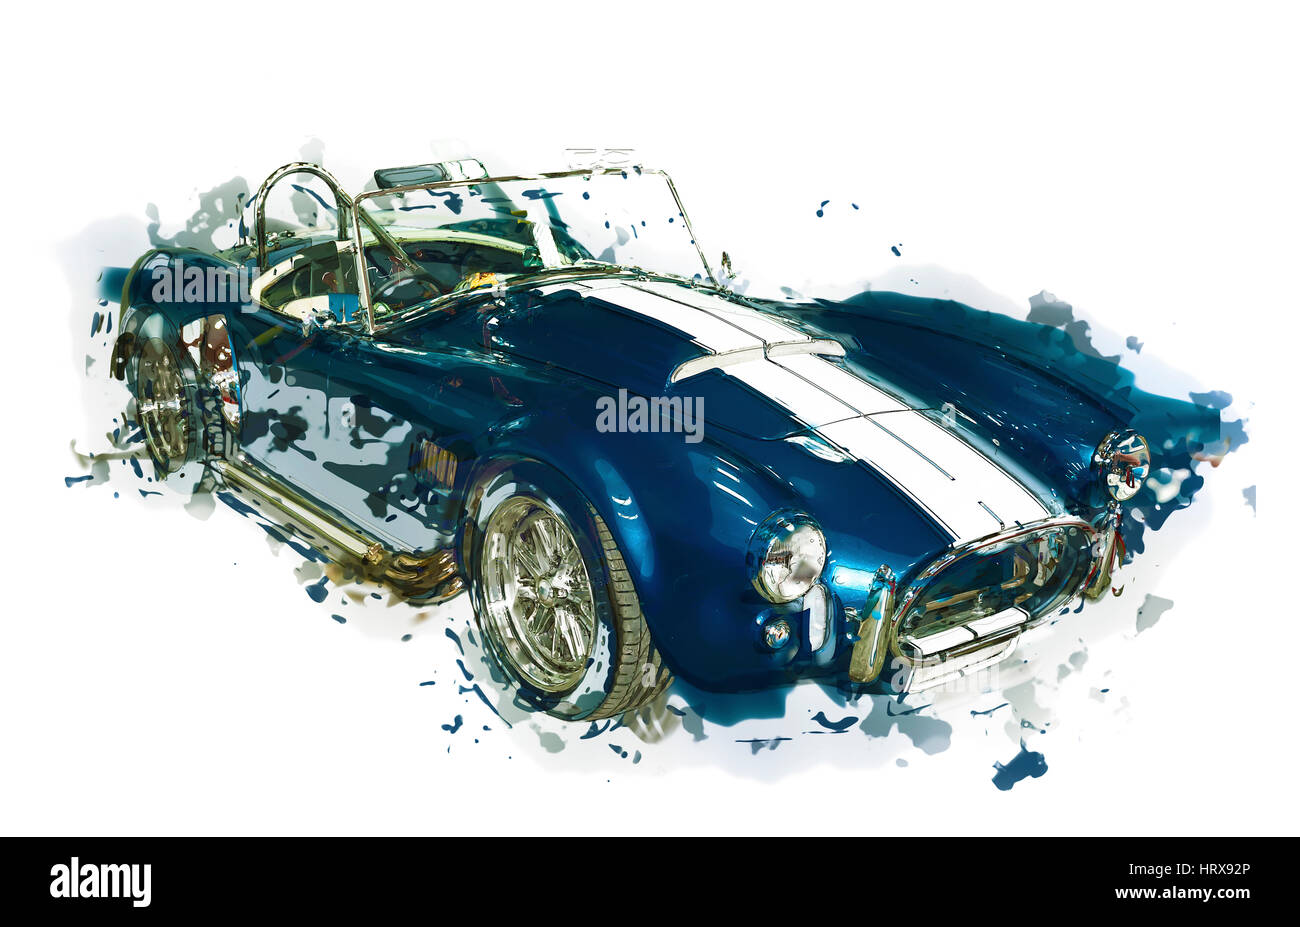 Abstract car illustration. Sportive vintage cabriolet, side view. Isolated. Contains clipping path. Stock Photo